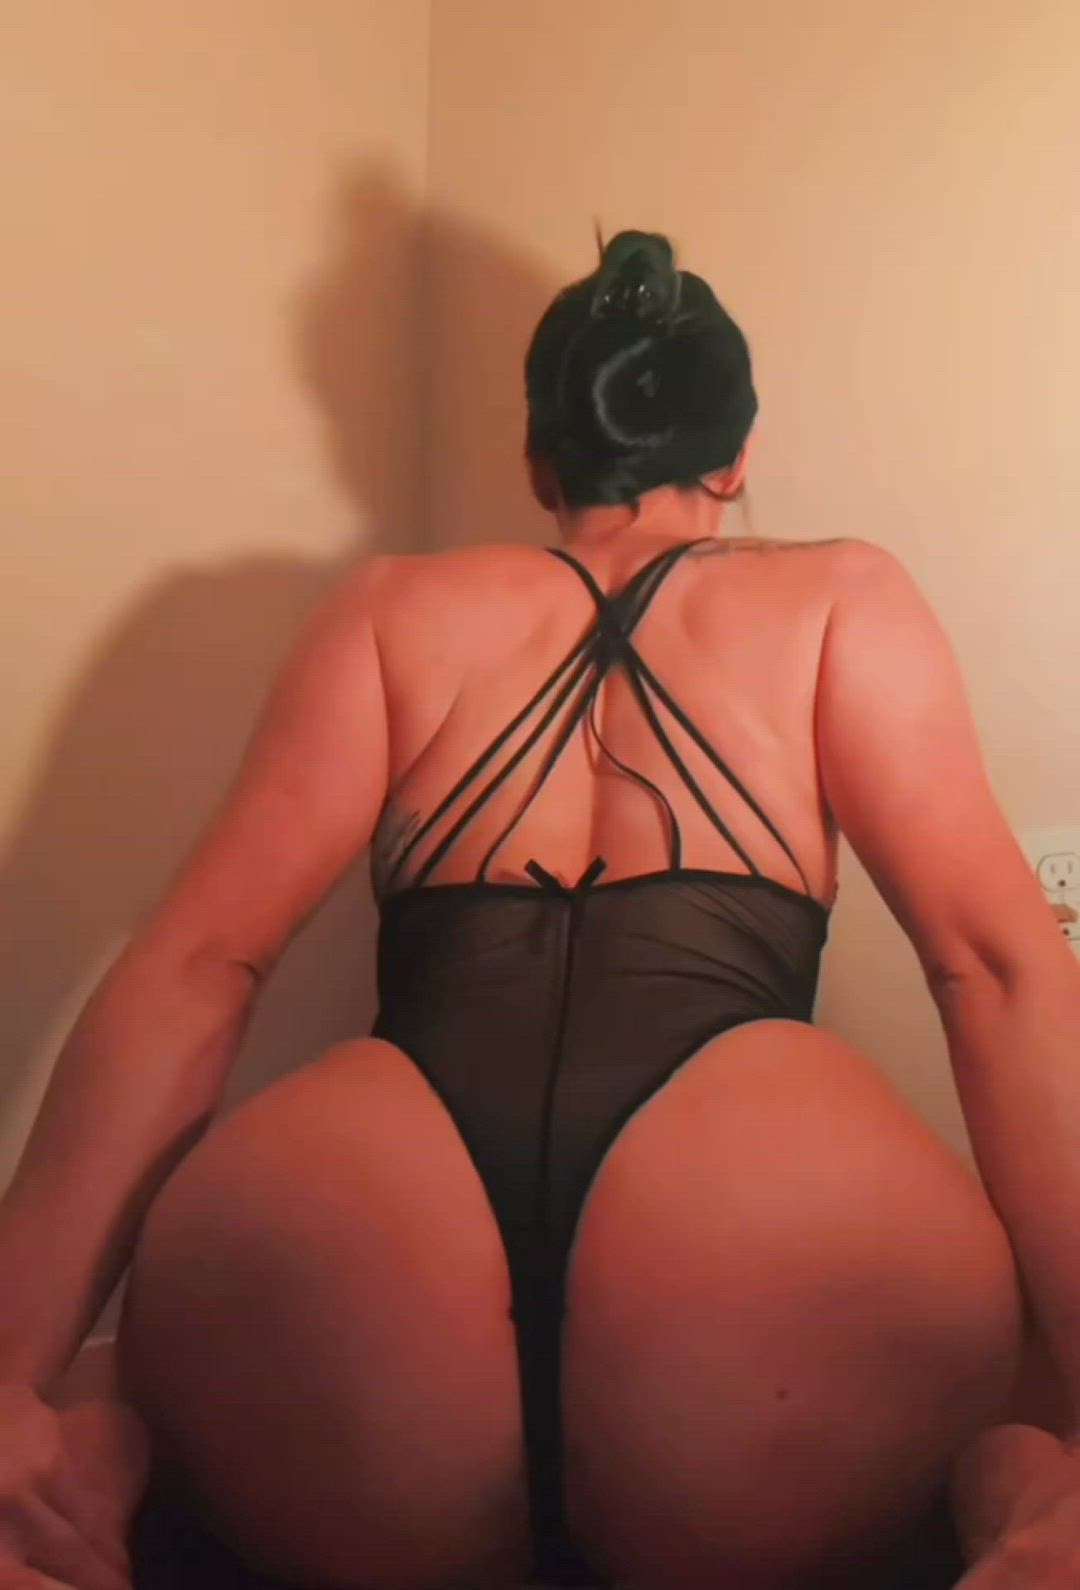 Ass porn video with onlyfans model squishysierra <strong>@squishysierra</strong>